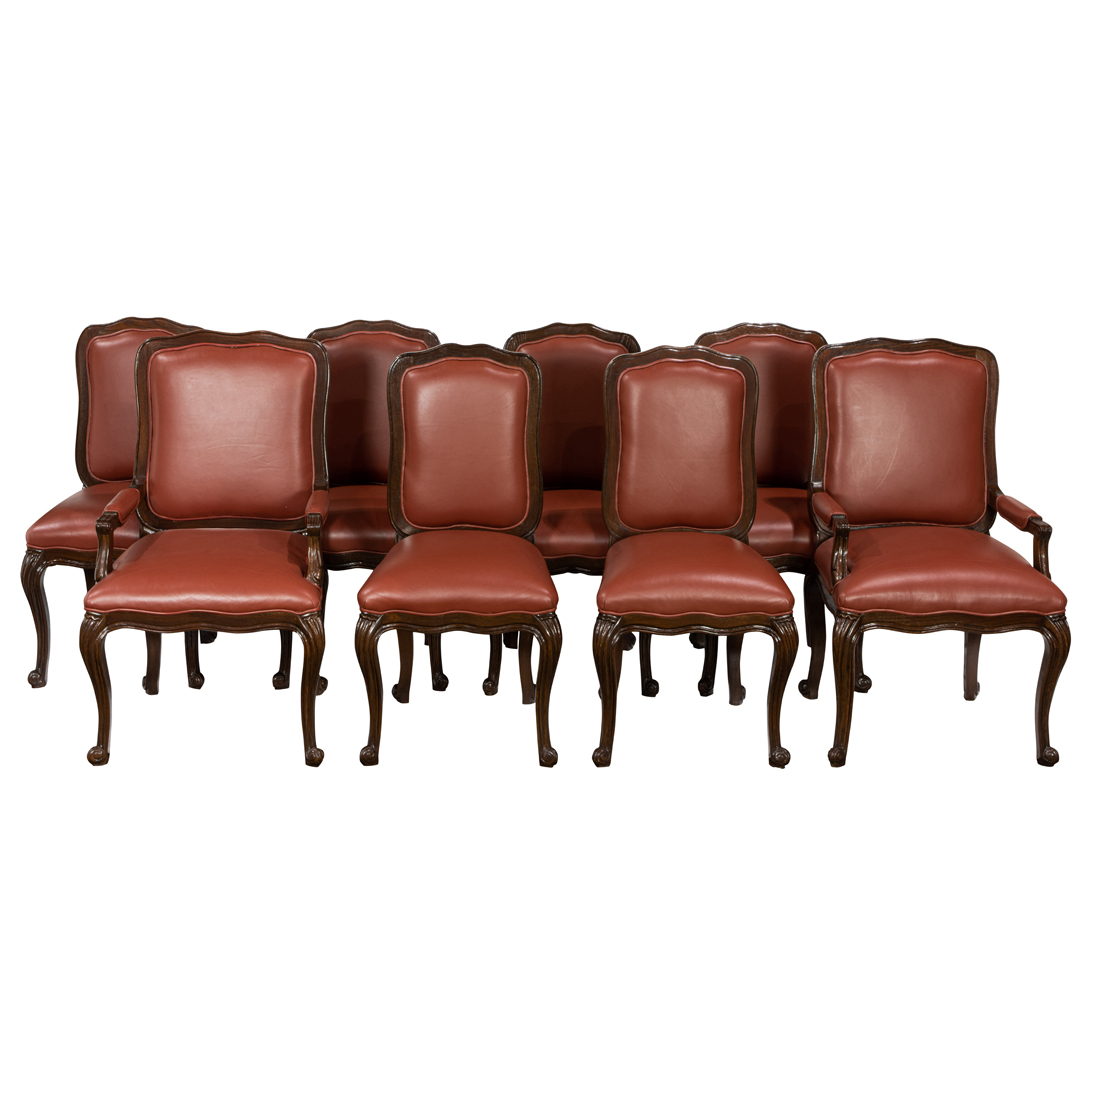 A SET OF EIGHT FRENCH PROVINCIAL